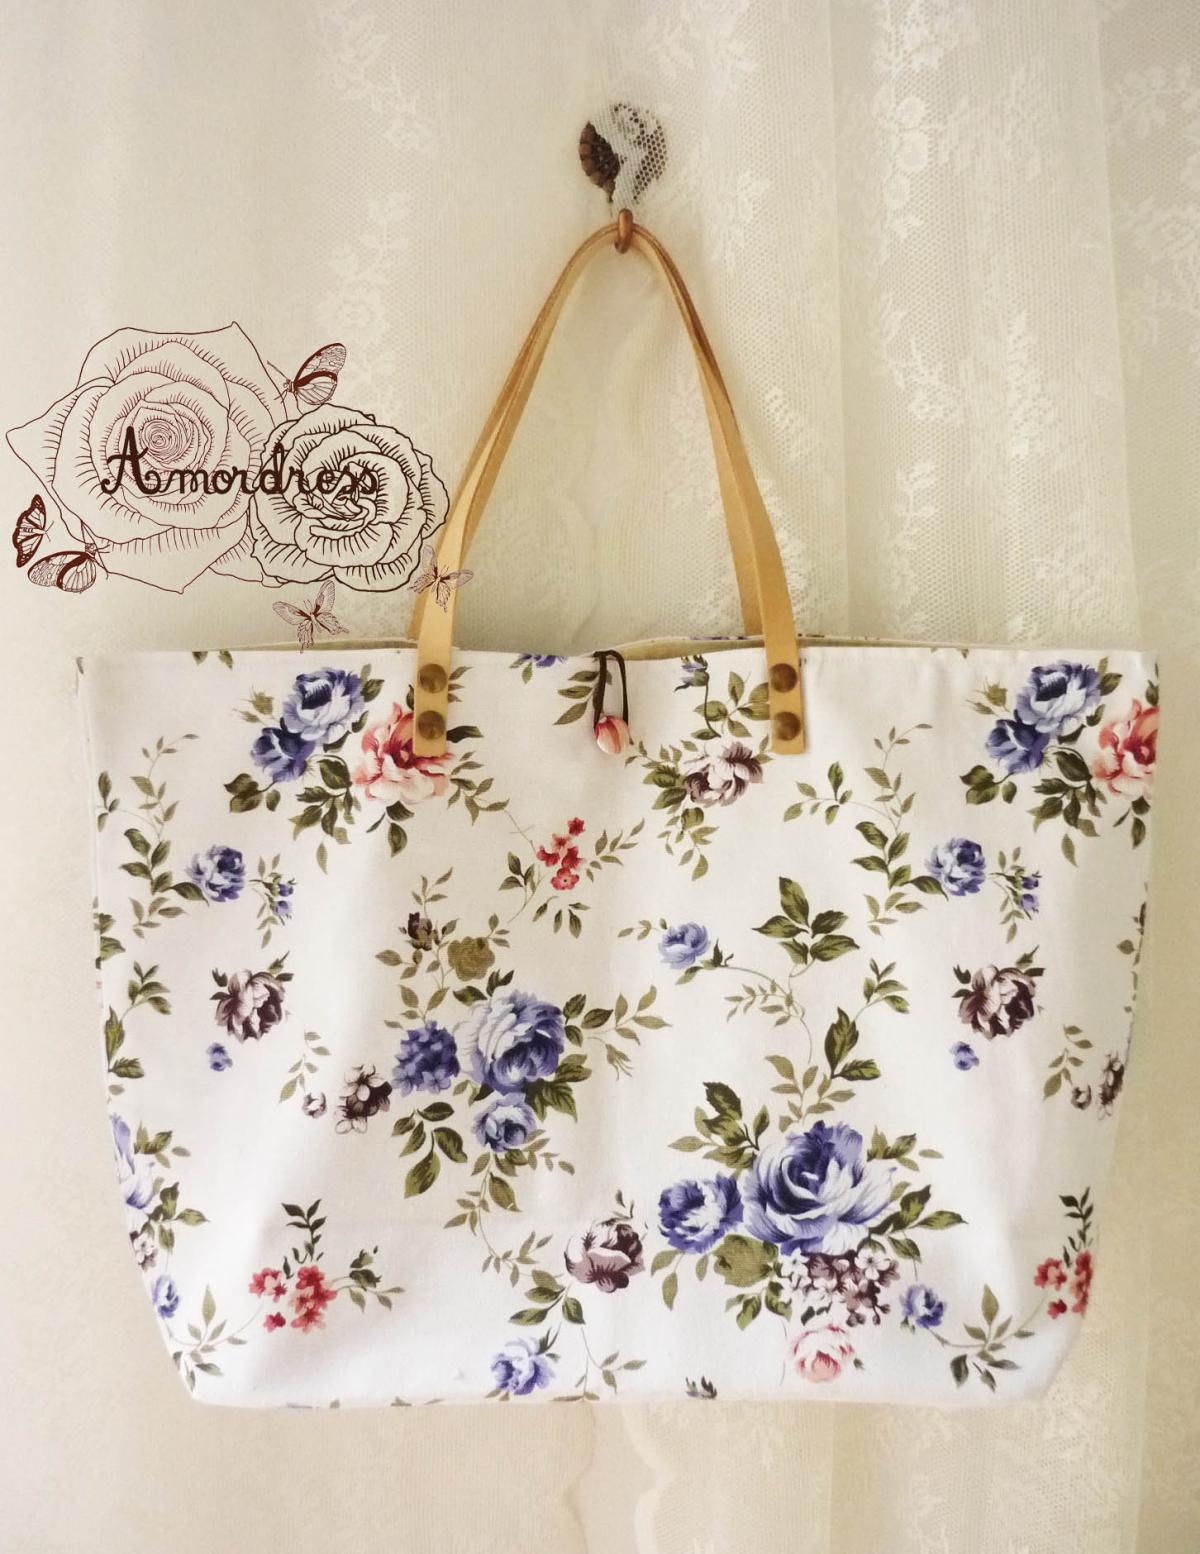 Floral Tote Bag Printed Canvas Bag Genuine Leather Strap White Blue Rose Floral Garden Shabby Chic Bag ...amor The Inspired Collection...